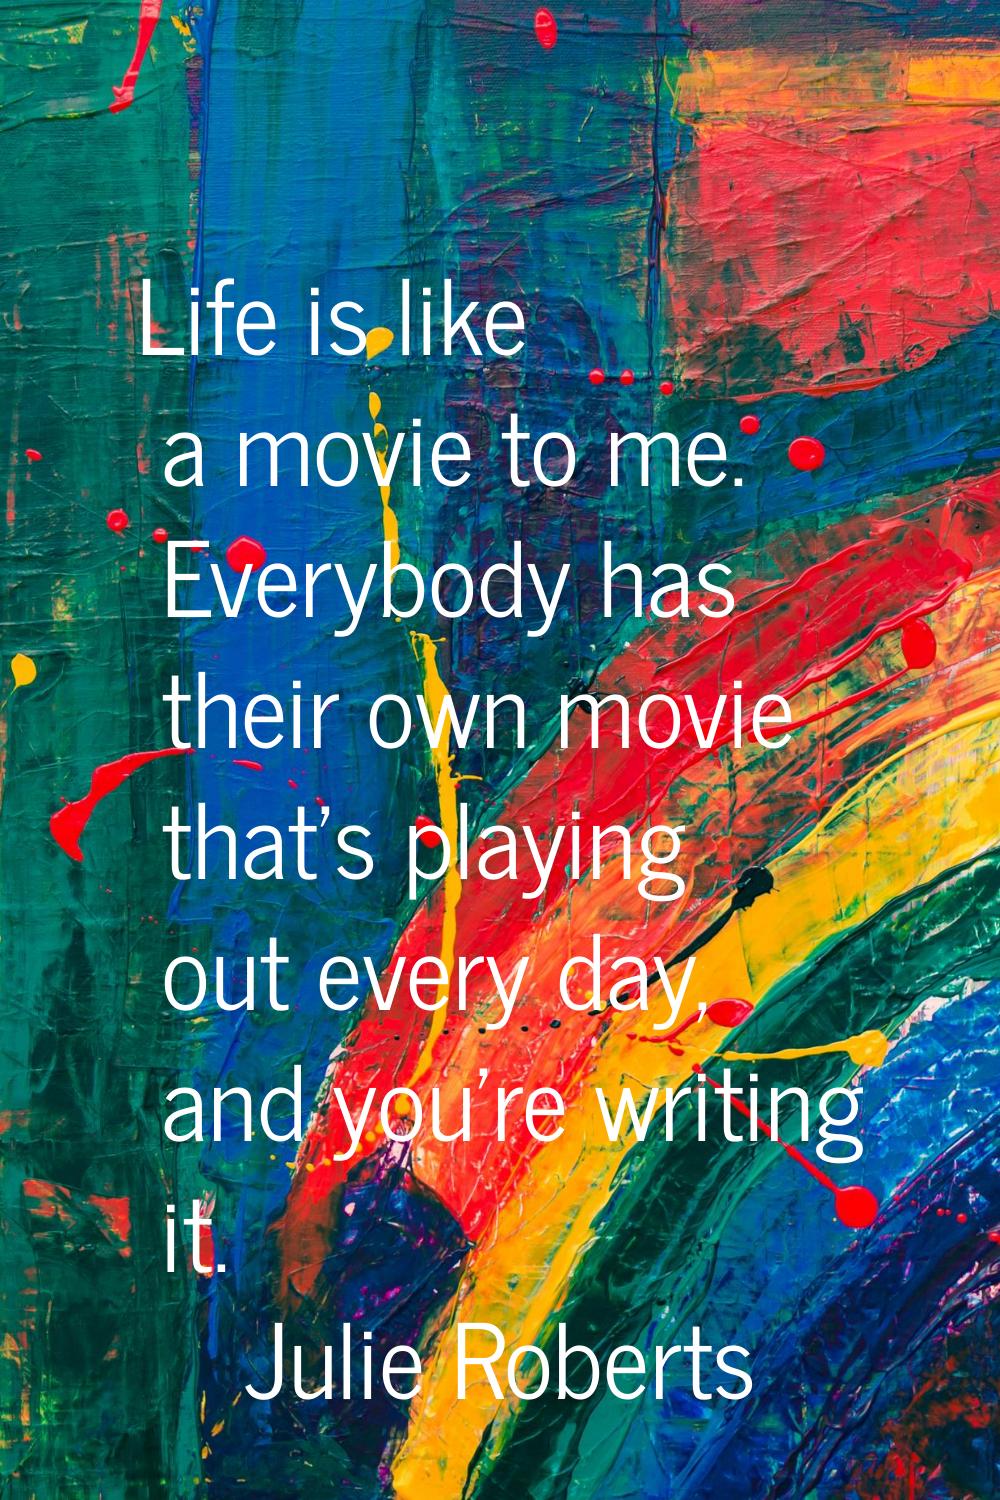 Life is like a movie to me. Everybody has their own movie that's playing out every day, and you're 